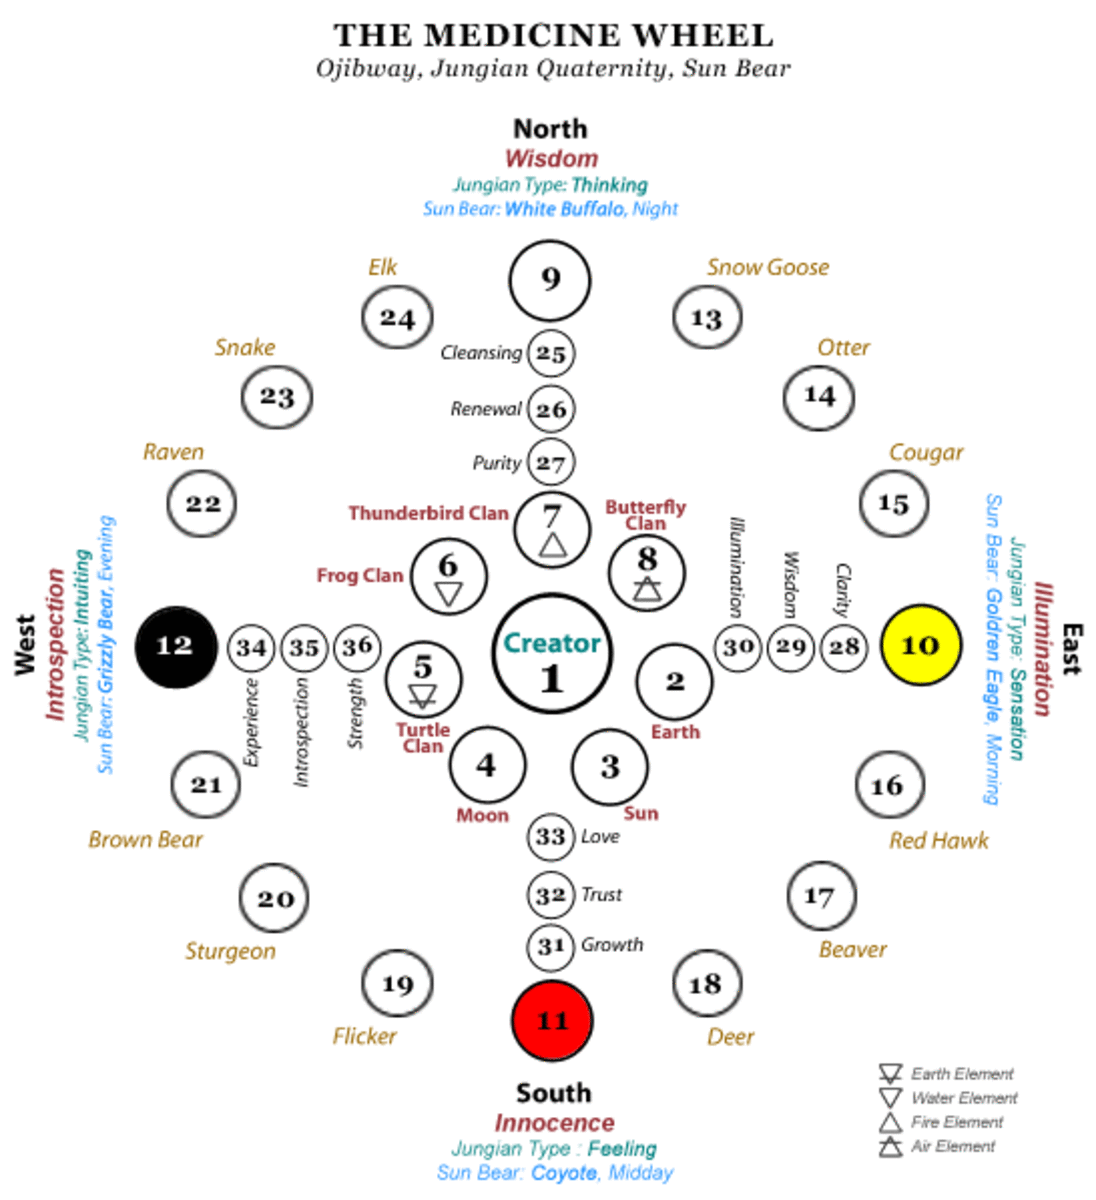 This map of the Ojibwa medicine wheel has as its inspiration, the cycles of the sun, moon and stars. In this map, many of the important locations have been identified with animals, which have very real significance to the Ojibwa.